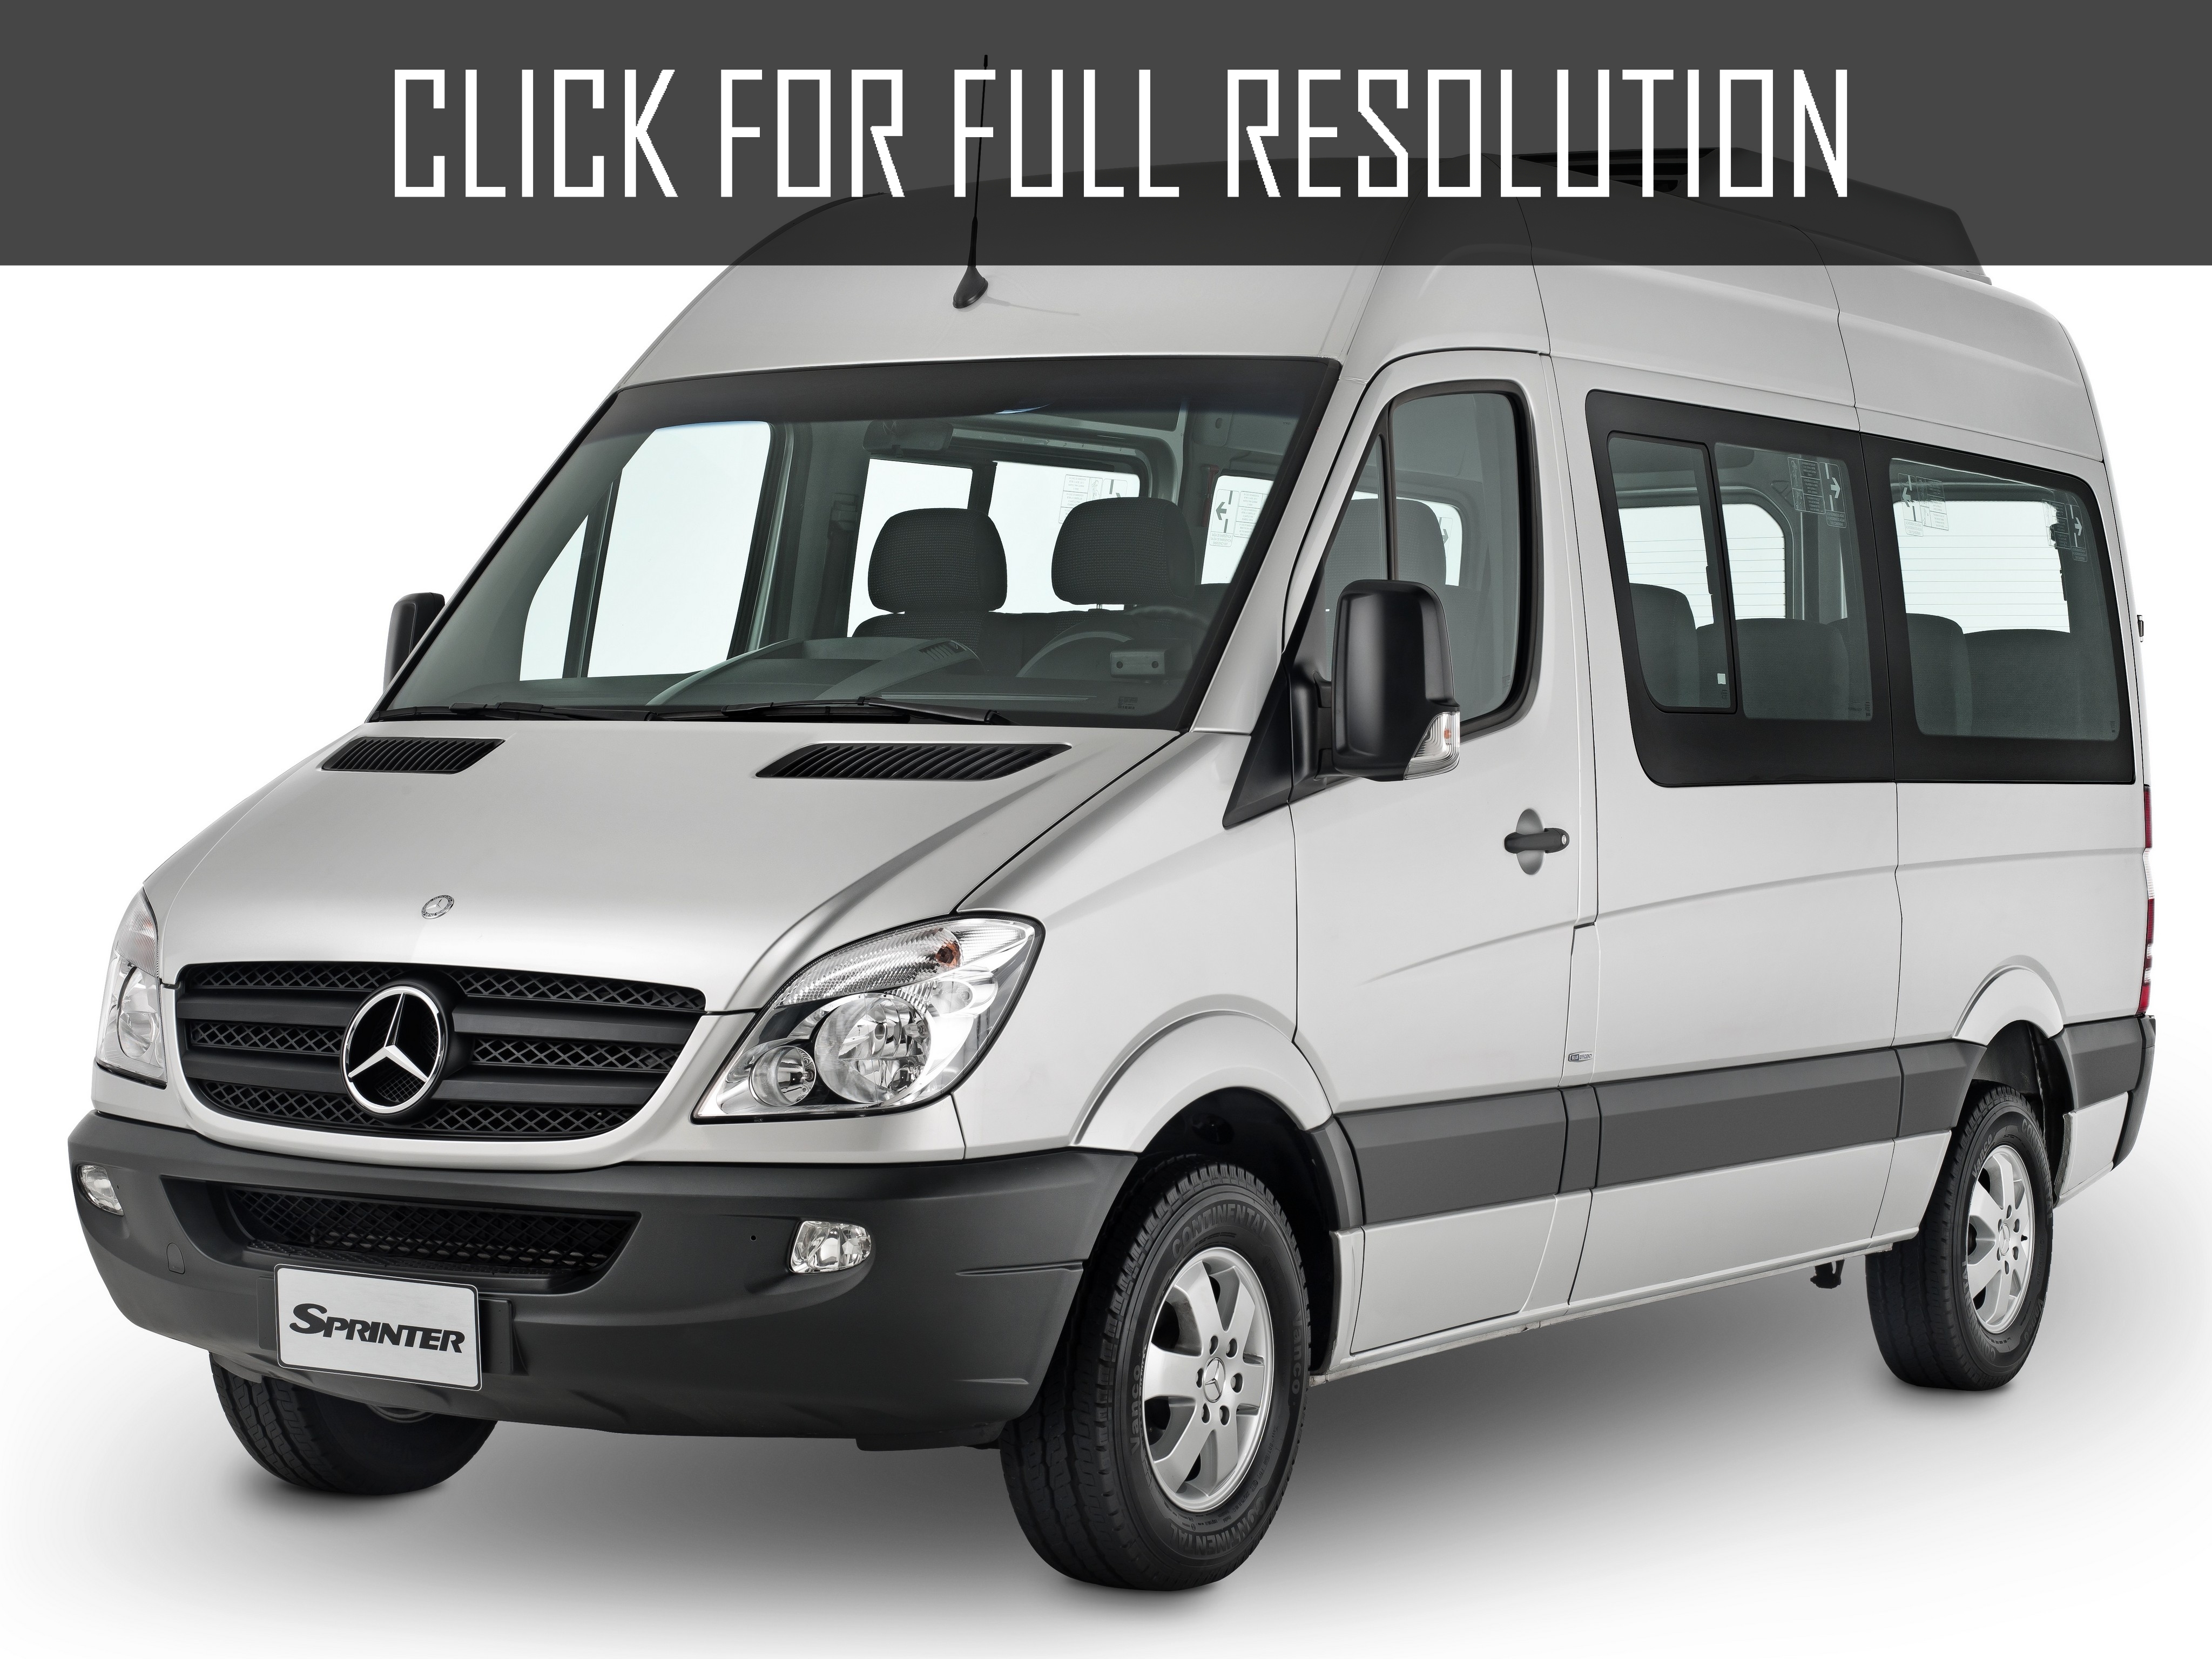 Mercedes Benz Sprinter 906 reviews, prices, ratings with